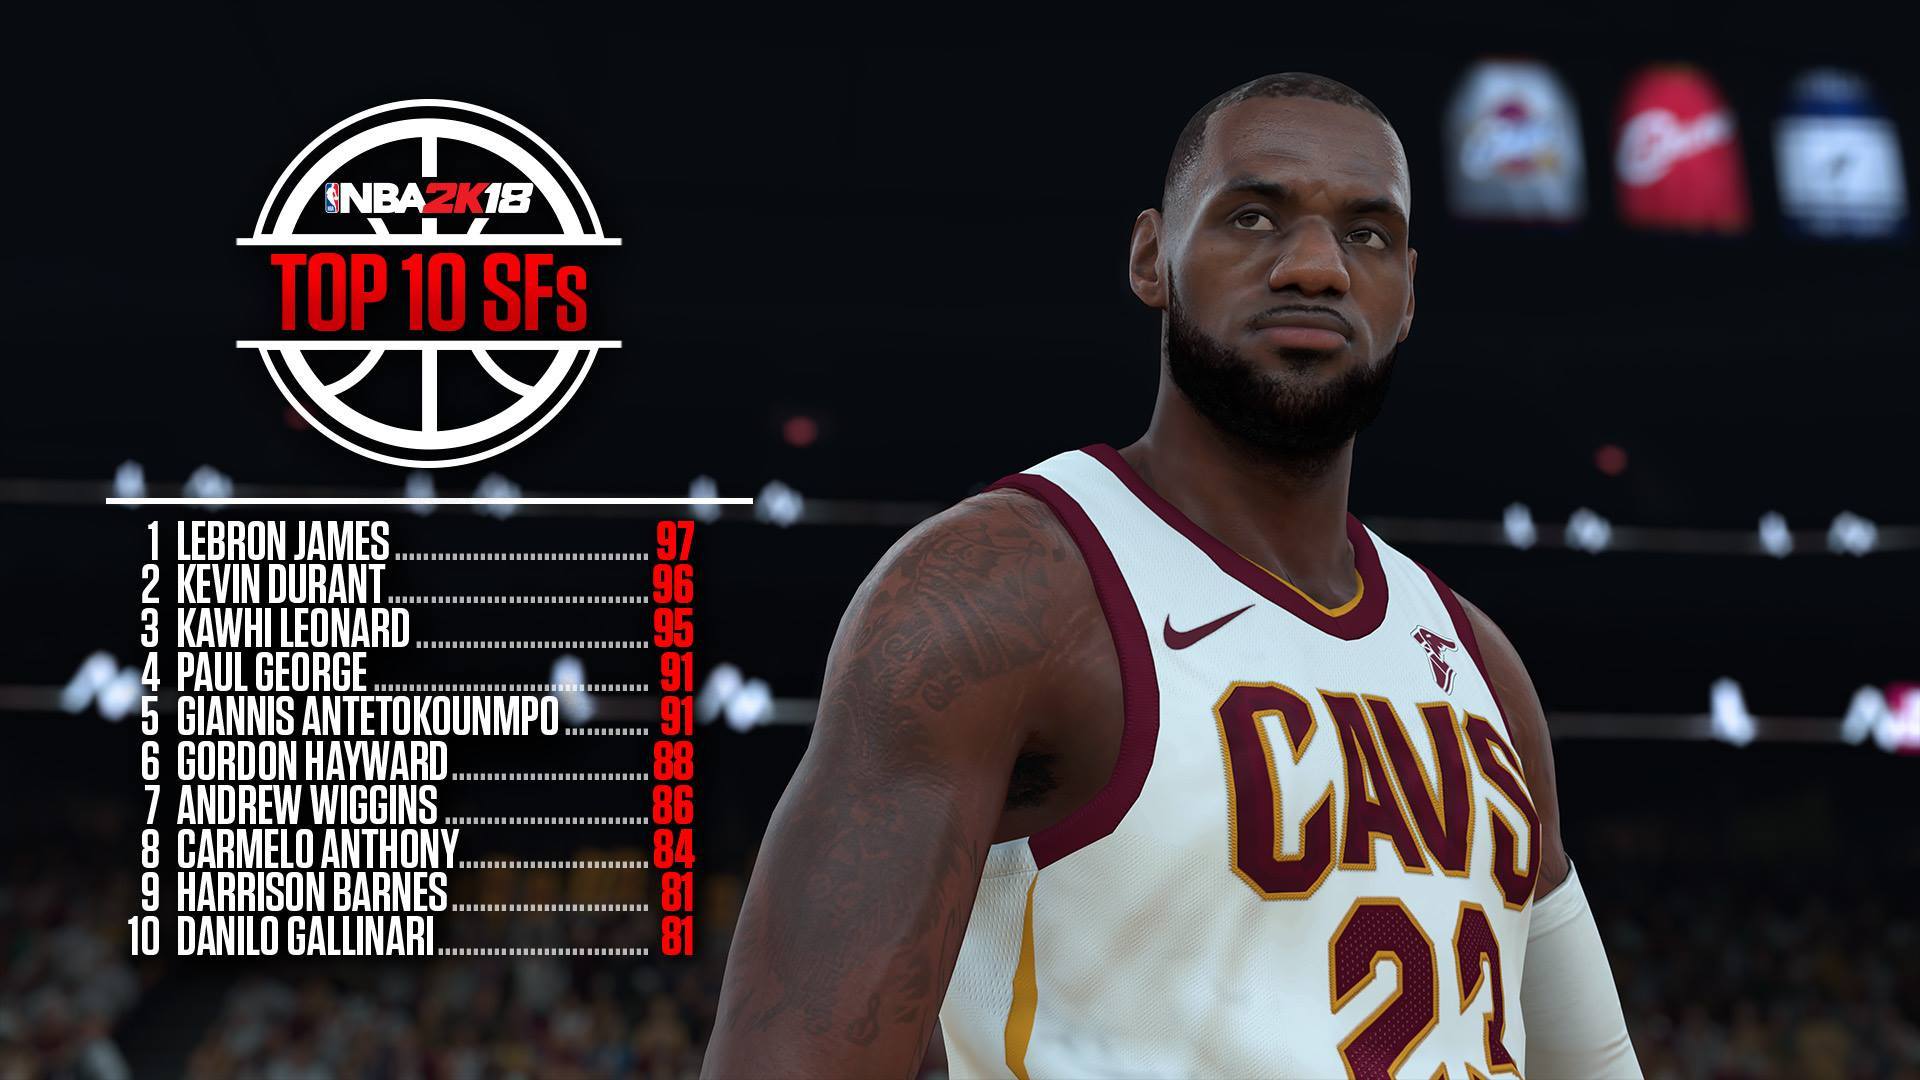 NBA 2K18 Player Ratings Revealed And Include A Few Surprises